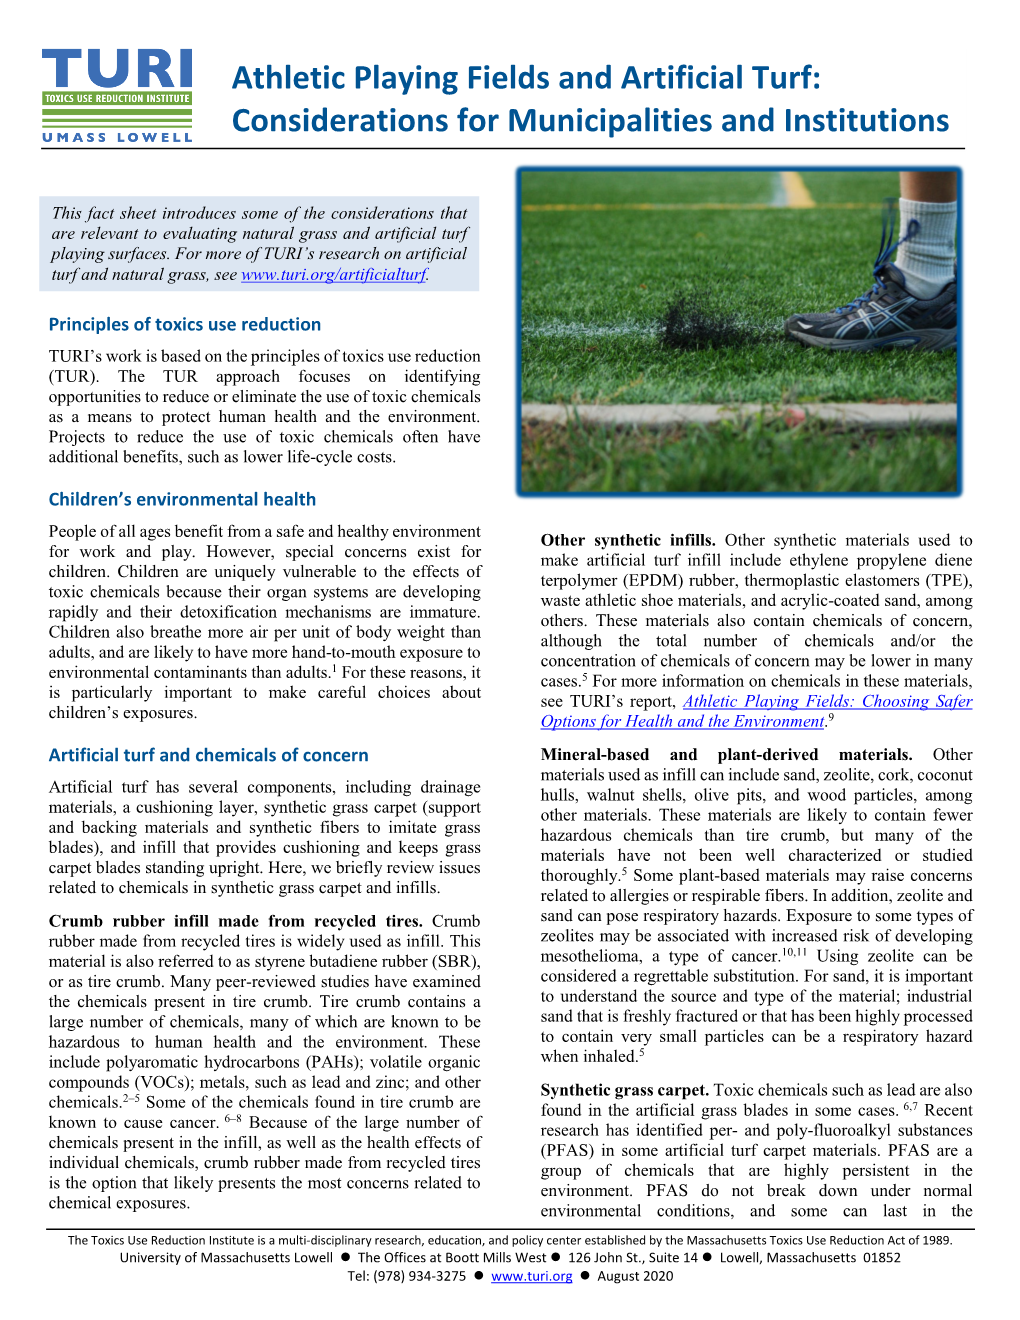 Athletic Playing Fields and Artificial Turf: Considerations for Municipalities and Institutions